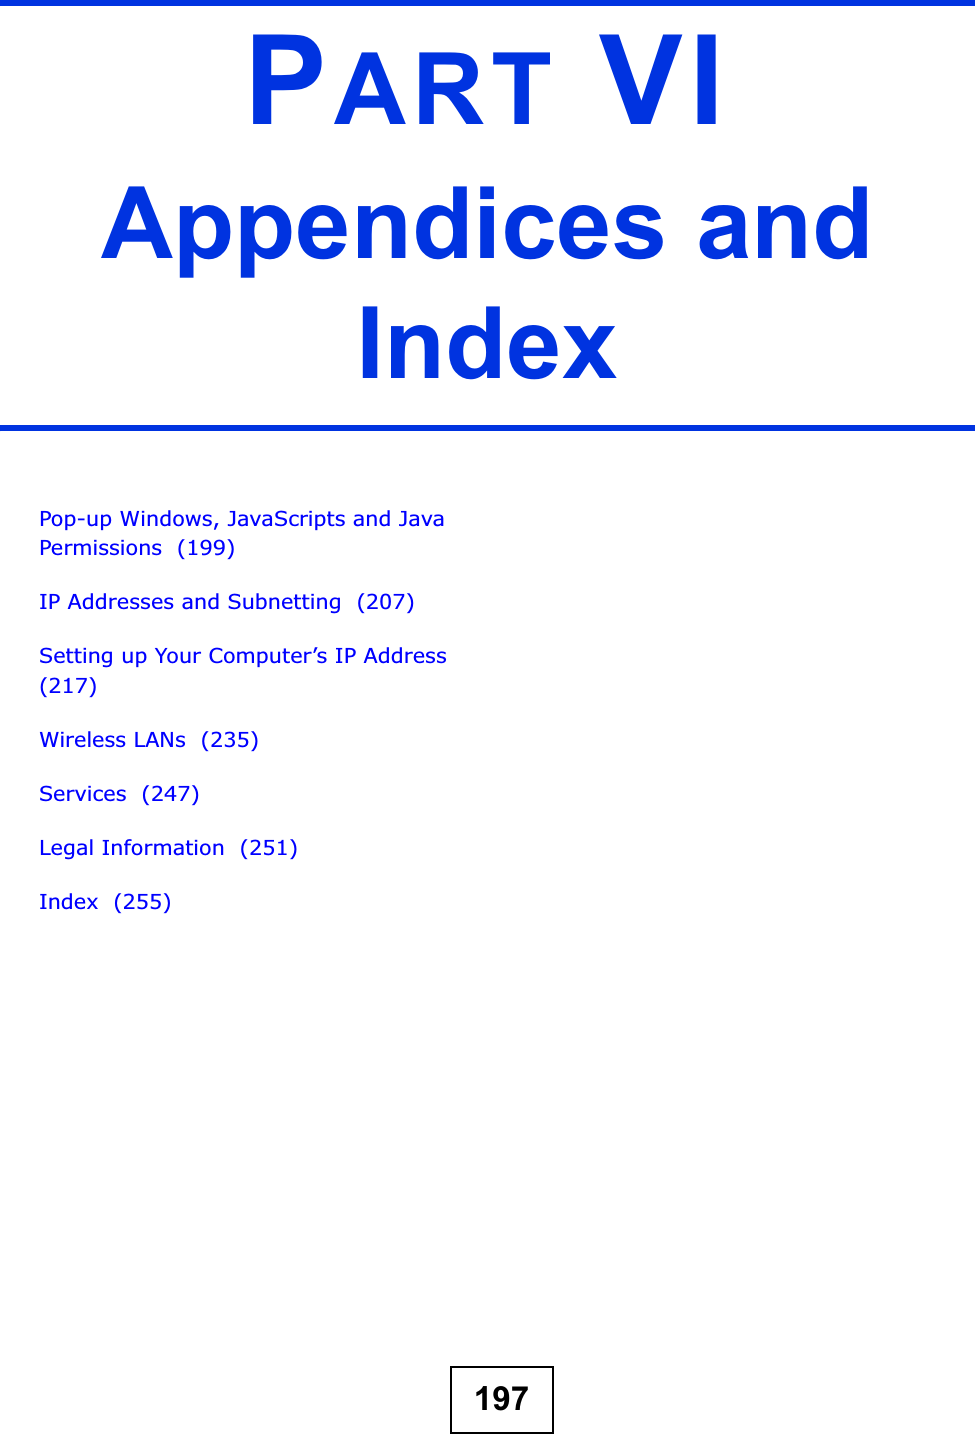 197PART VIAppendices and IndexPop-up Windows, JavaScripts and Java Permissions  (199)IP Addresses and Subnetting  (207)Setting up Your Computer’s IP Address  (217)Wireless LANs  (235)Services  (247)Legal Information  (251)Index  (255)